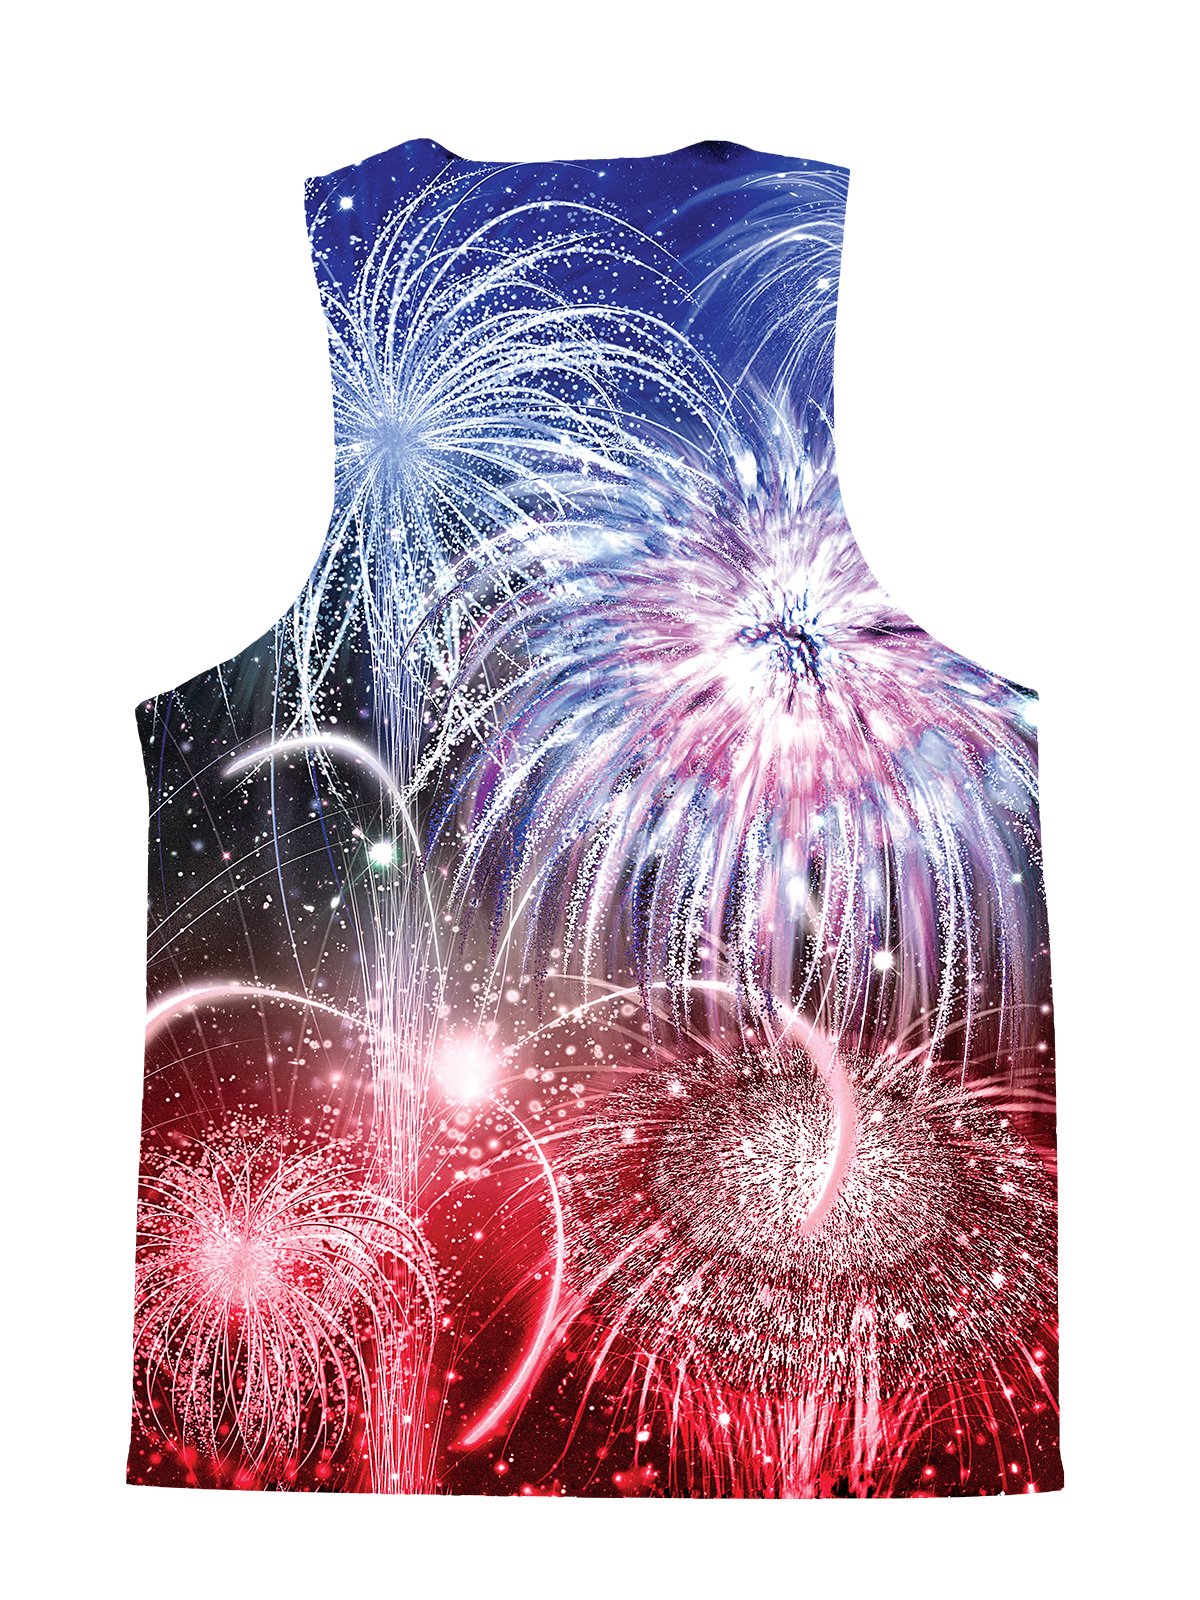 Psychedelic all over print 4th of July tank by GratefullyDyed Apparel back view.